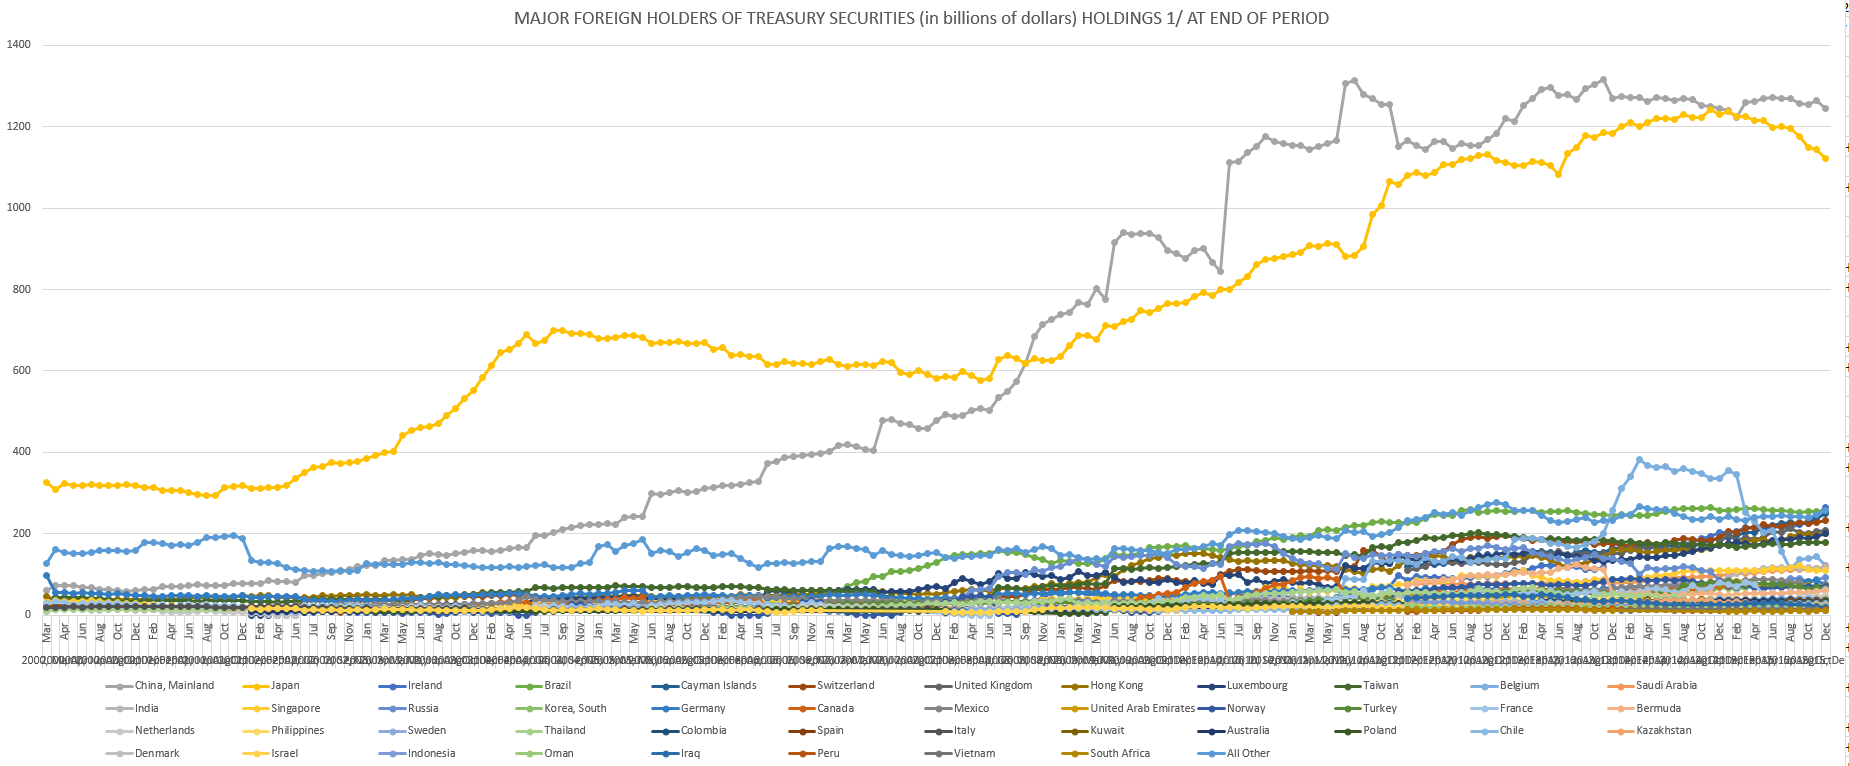 MAJOR FOREIGN HOLDERS OF TREASURY SECURITIES (in billions of dollars) HOLDINGS 1/ AT END OF PERIOD